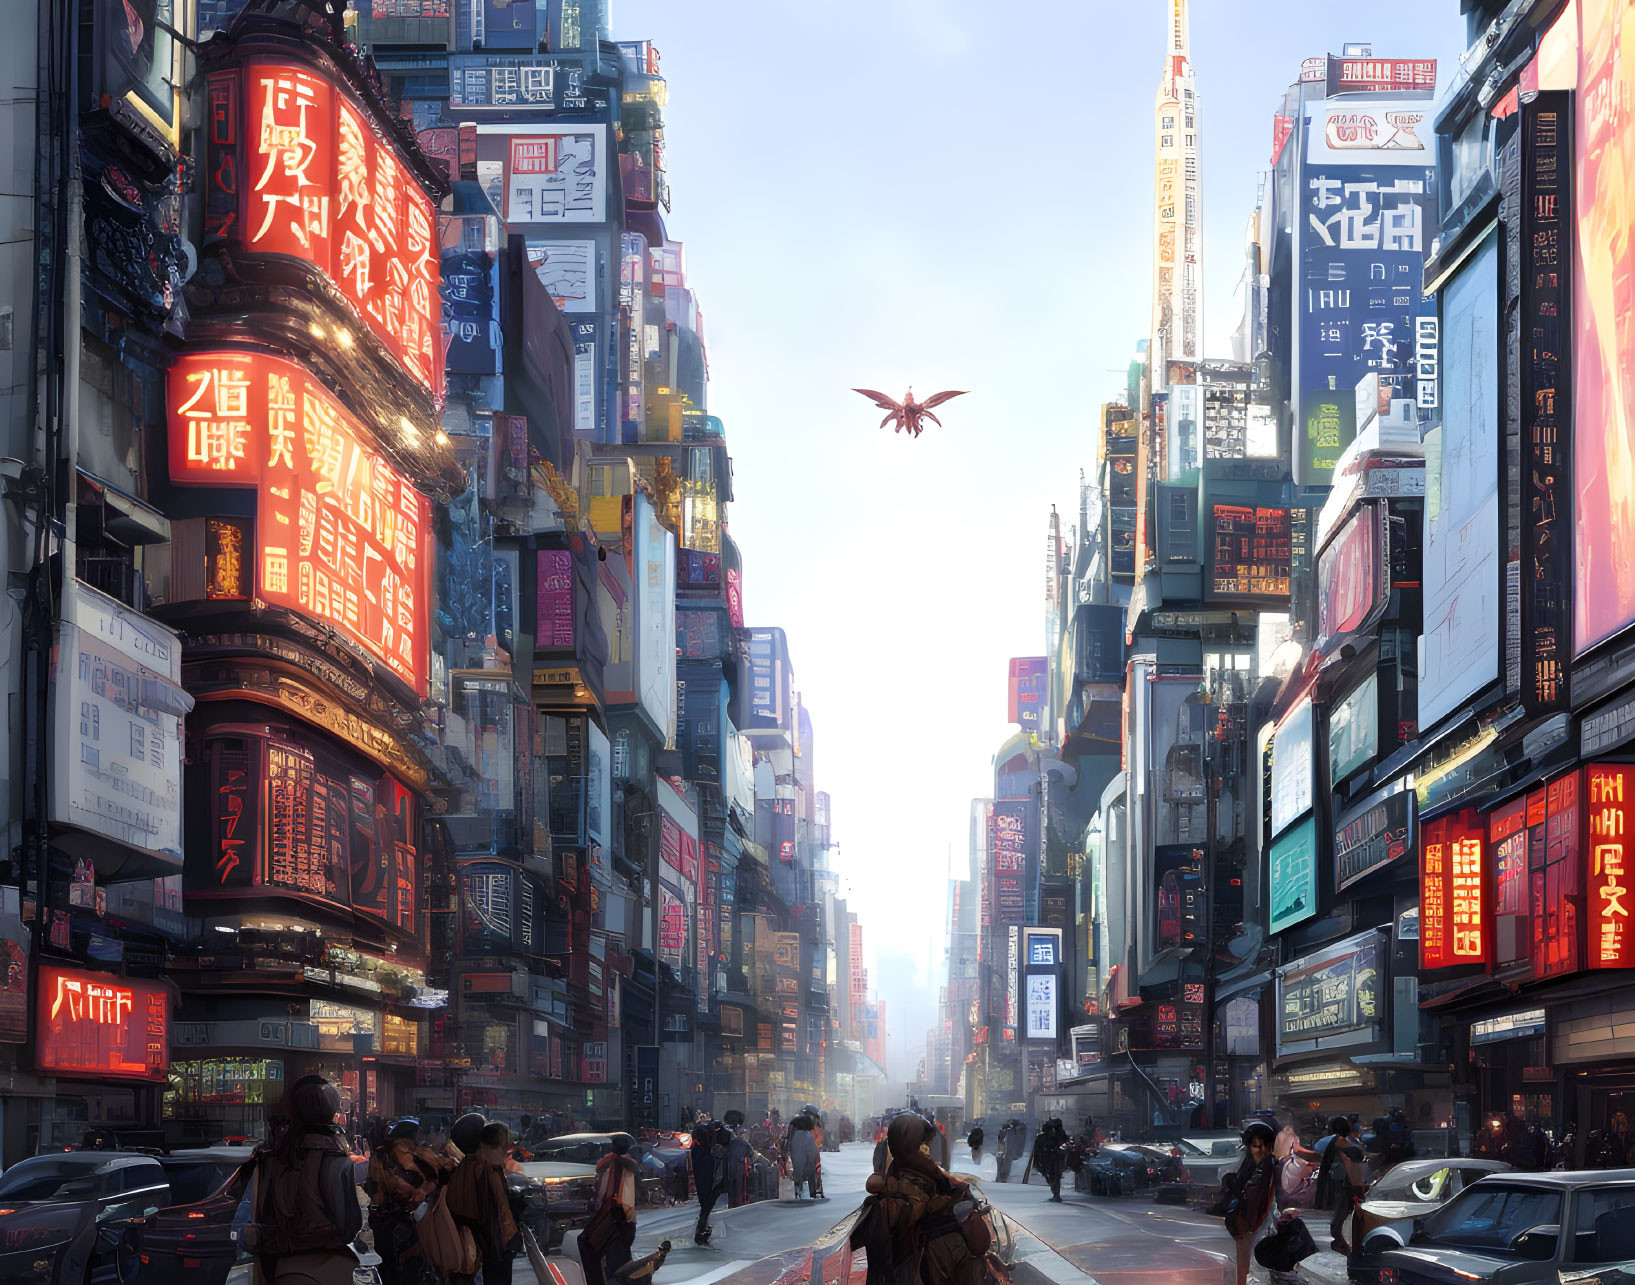 Futuristic city street with neon signs, pedestrians, and drone under hazy sky